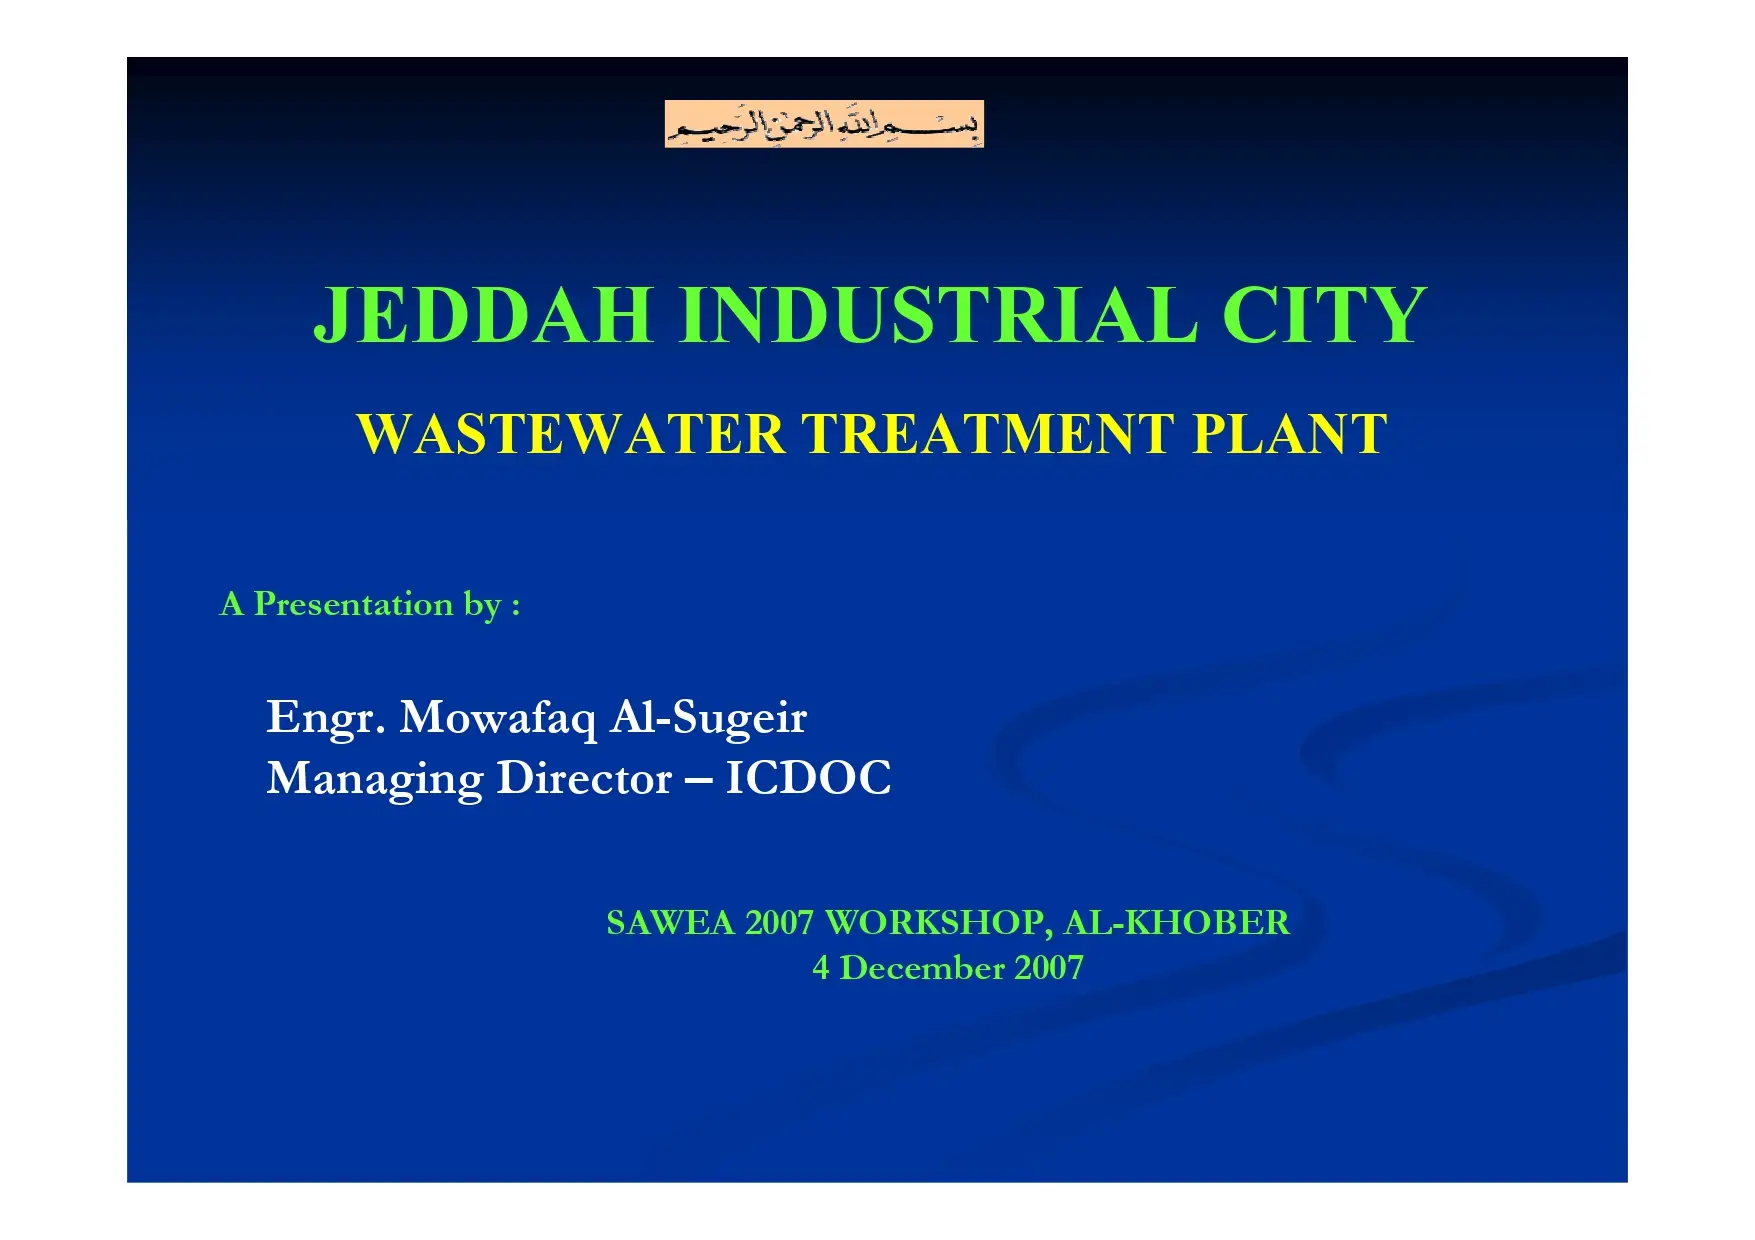 Jeddah Industrial City Wastewater Treatment Plant